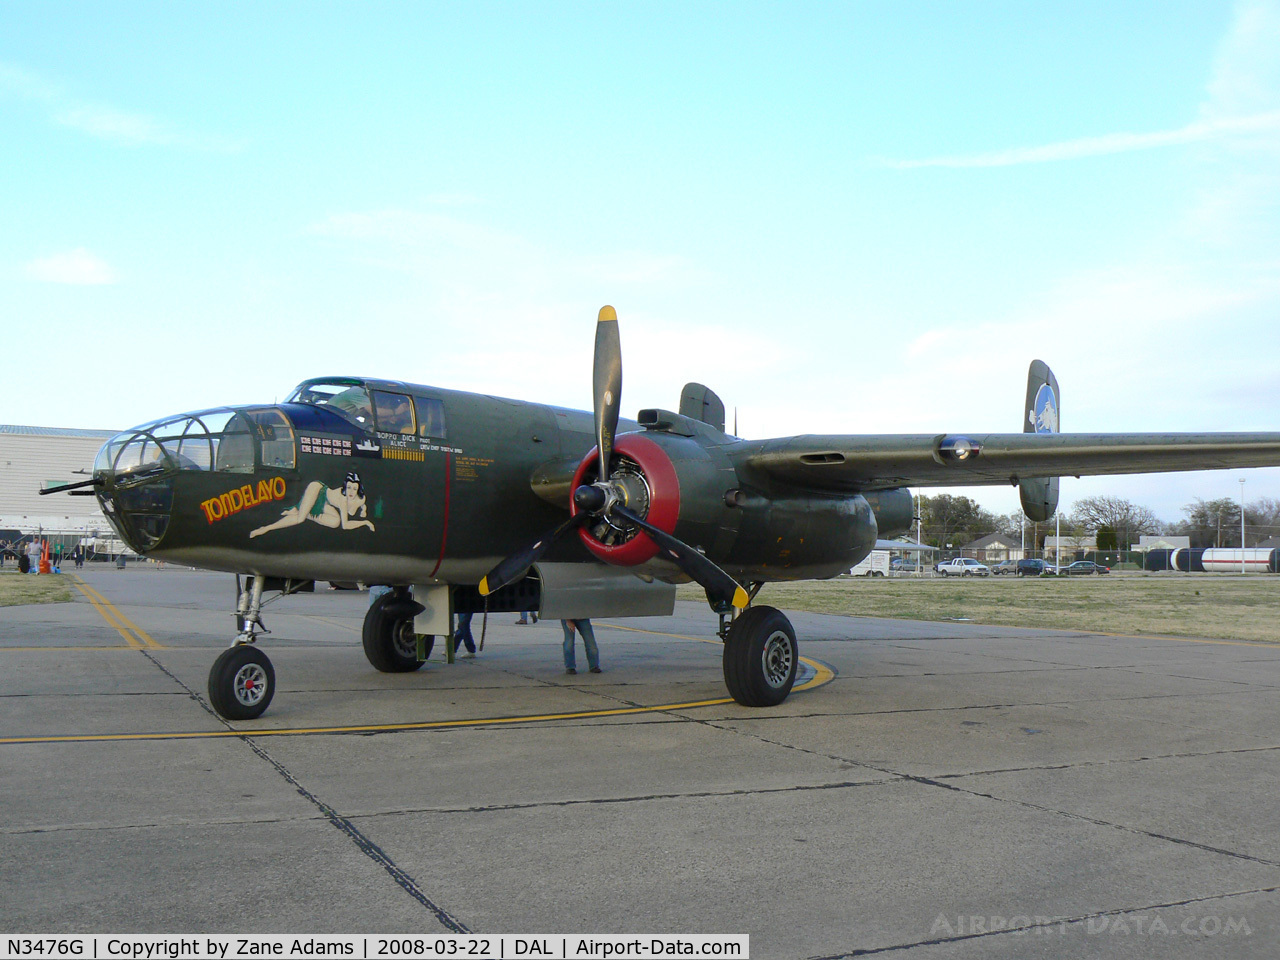 N3476G, 1944 North American B-25J Mitchell C/N 108-33257, Collings Foundation - Tondelayo after another great day of flying!